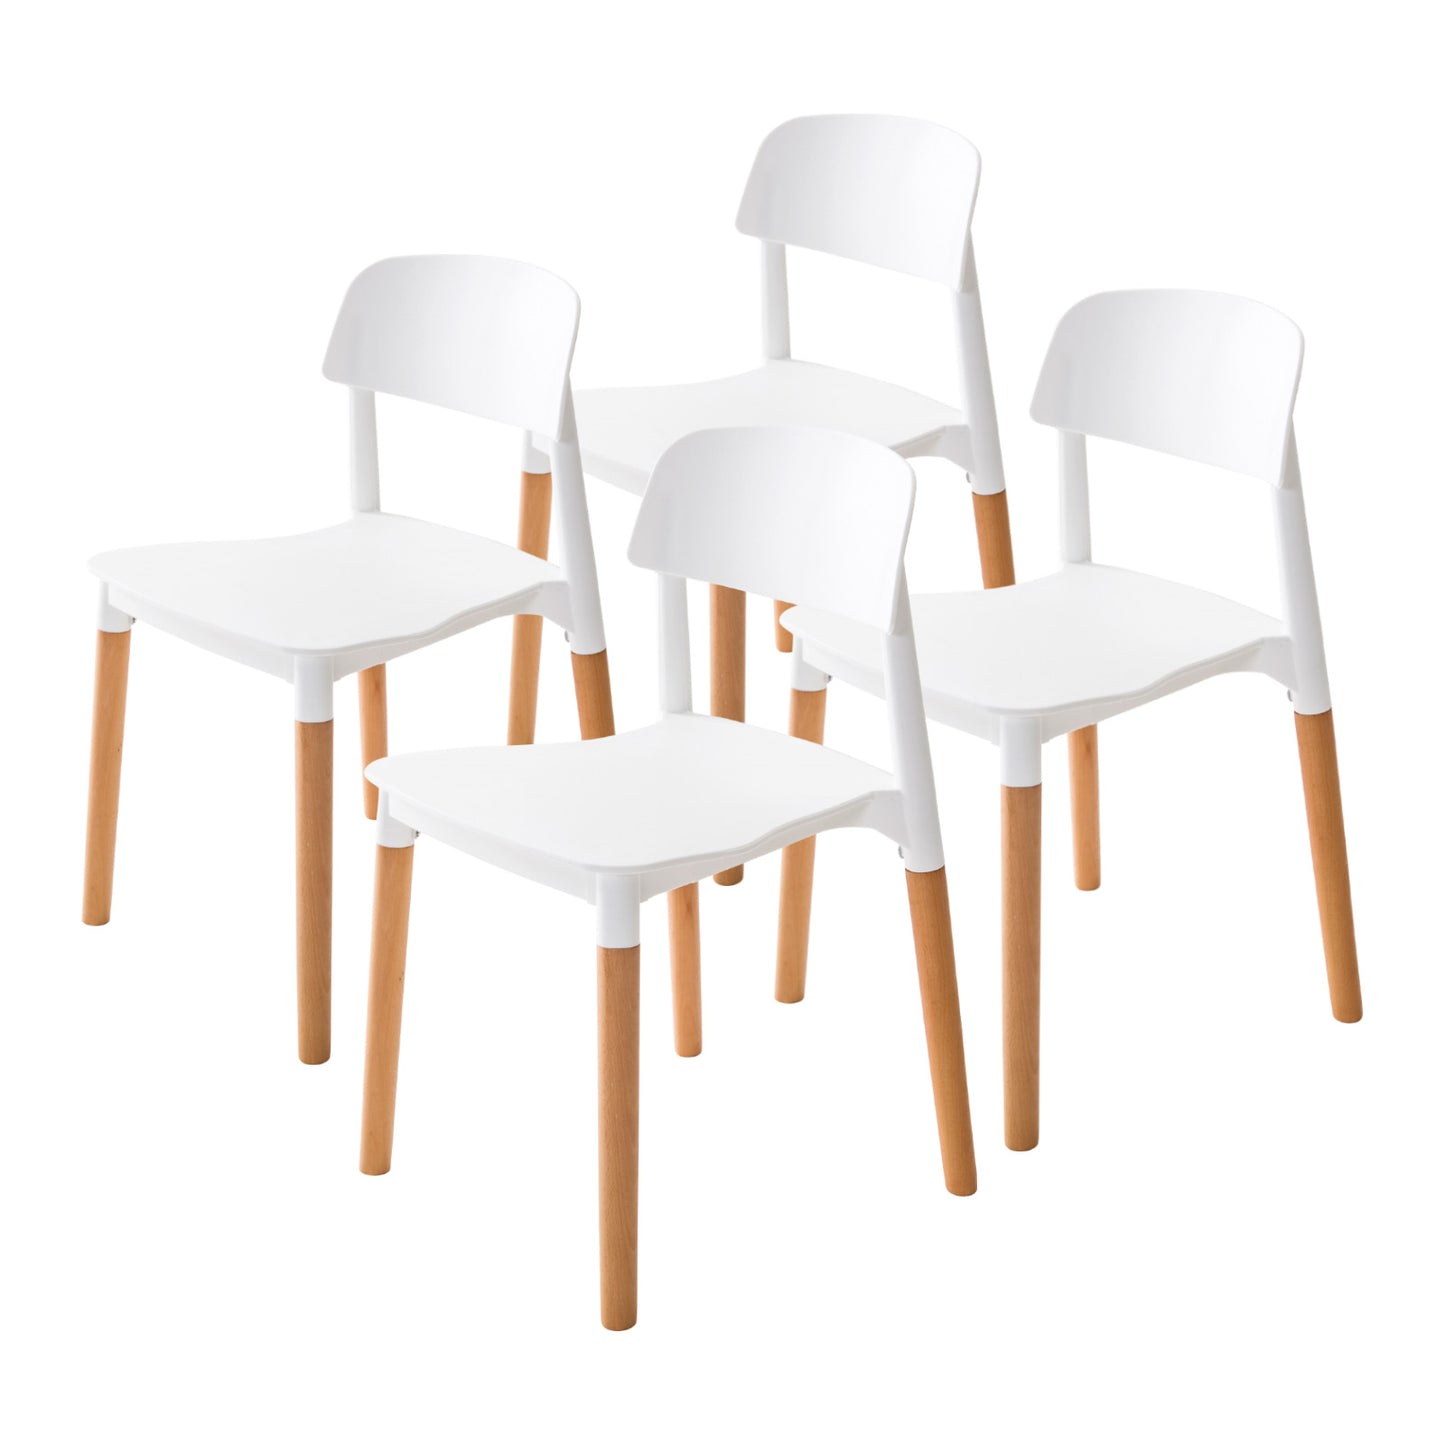 Mabel Set of 4 Retro Belloch Stackable Dining Cafe Chair - White